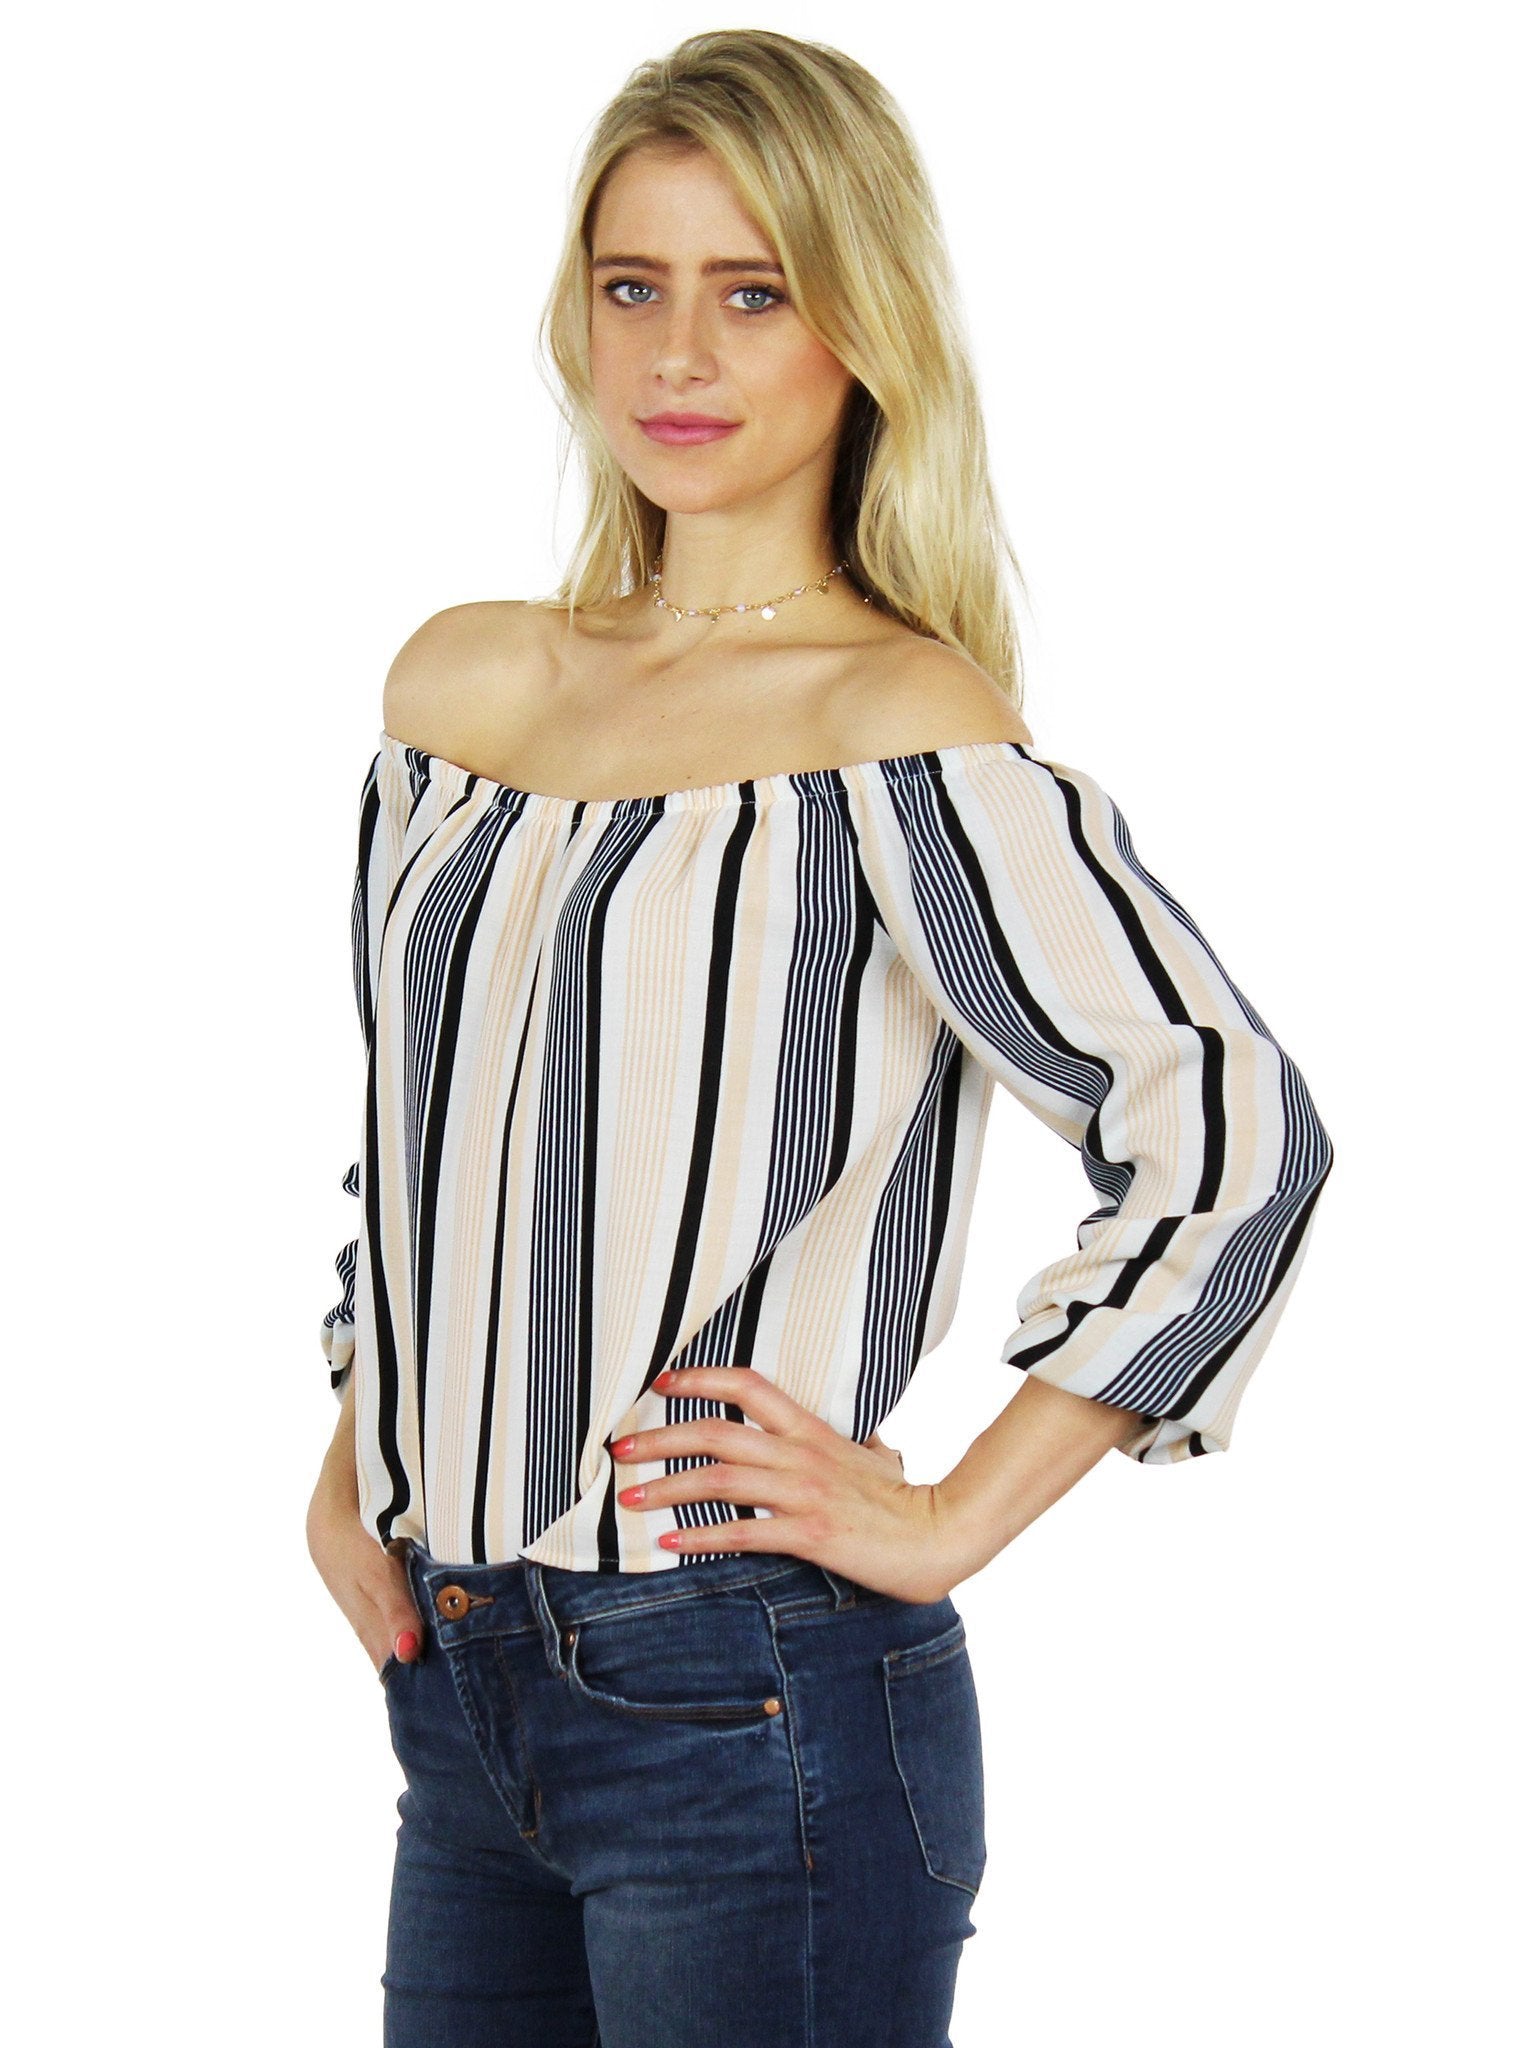 Girl outfit in a top rental from Lucca Couture called Stripes Are The New Black Blouse